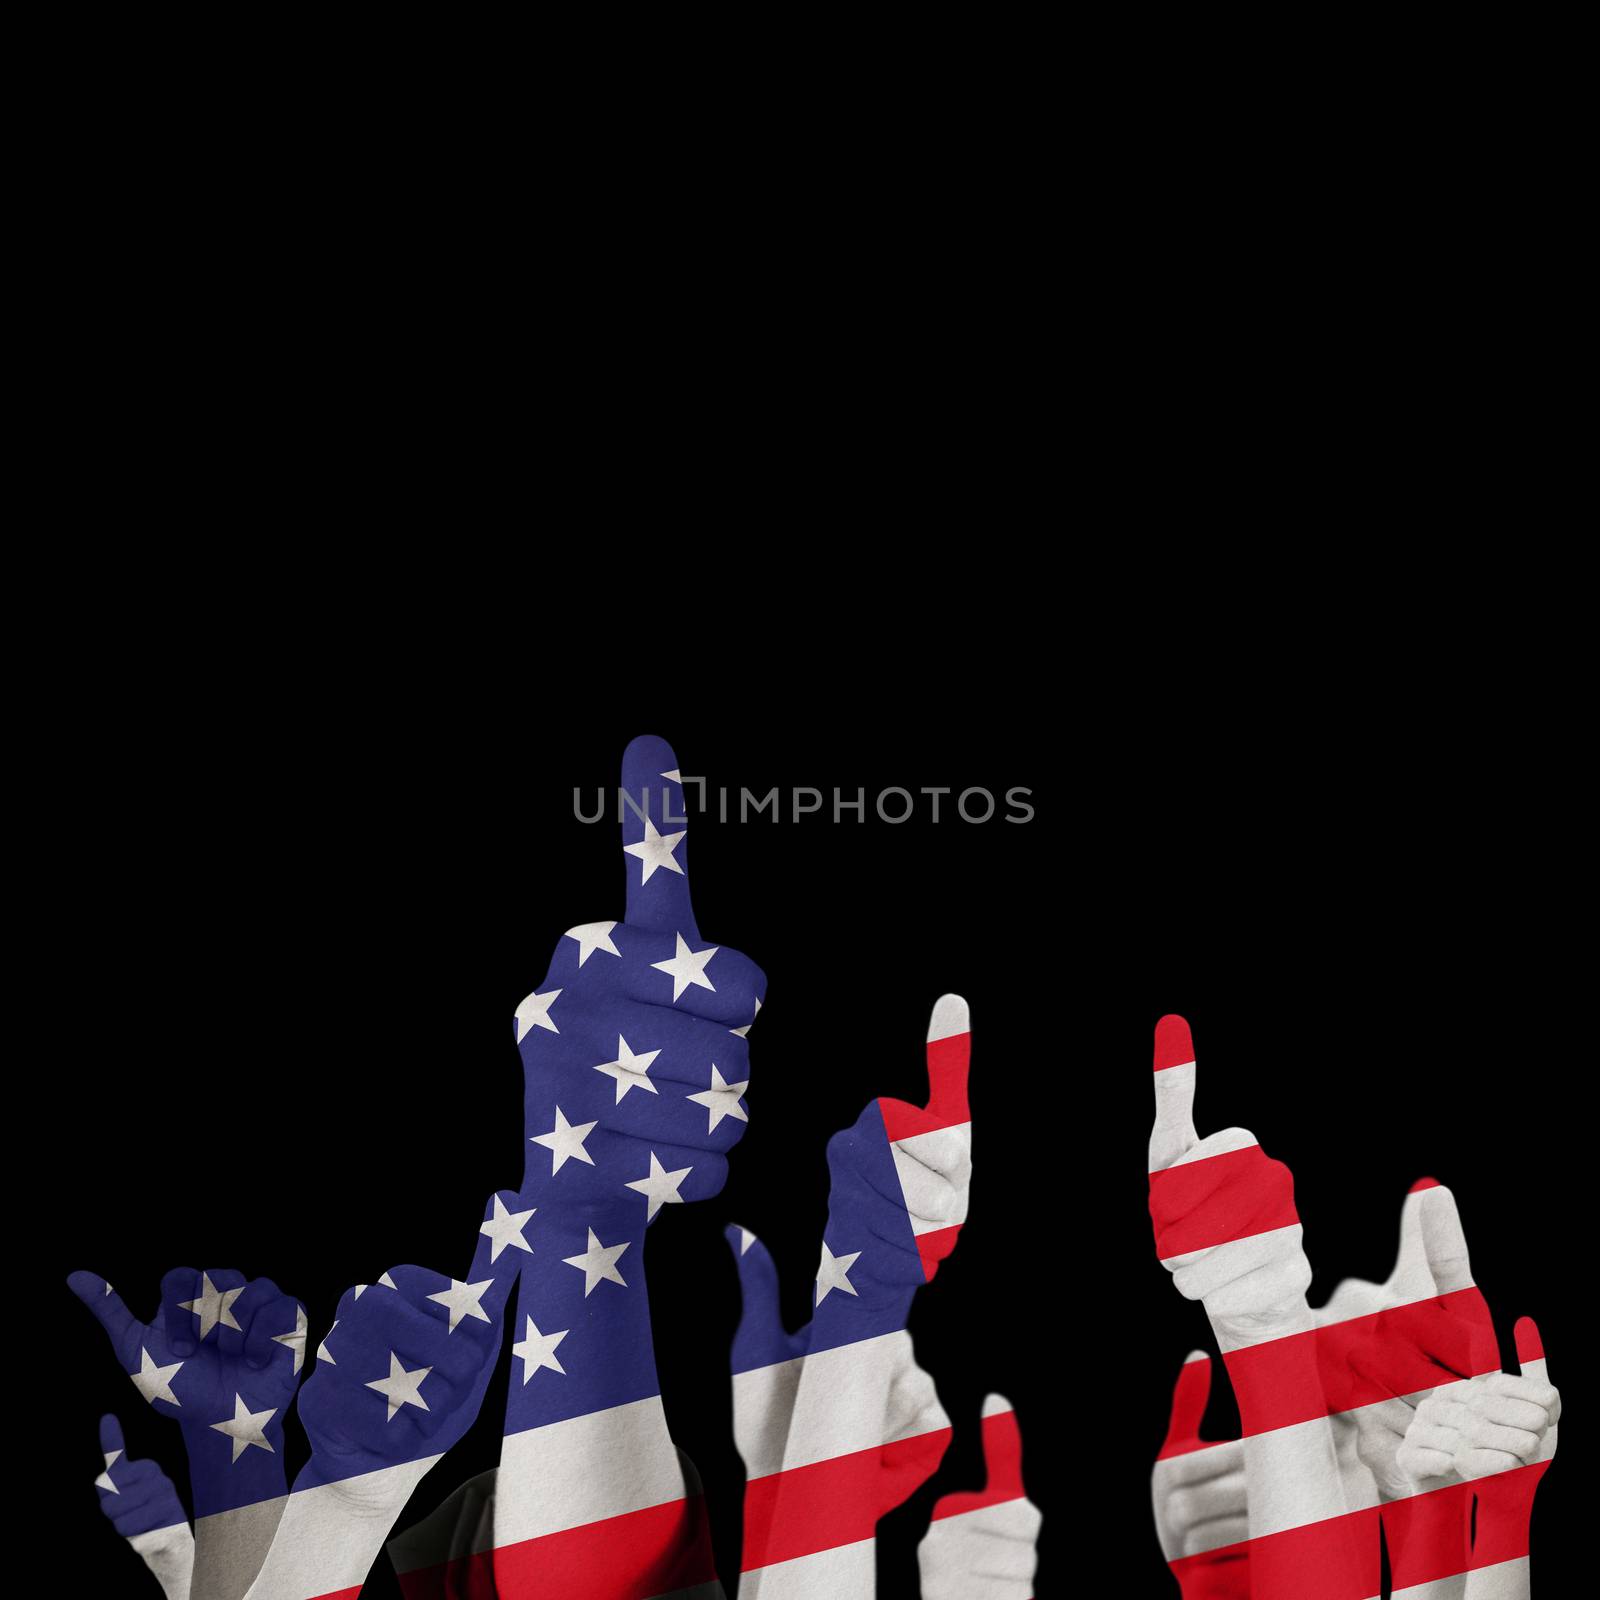 Hands showing thumbs up against black